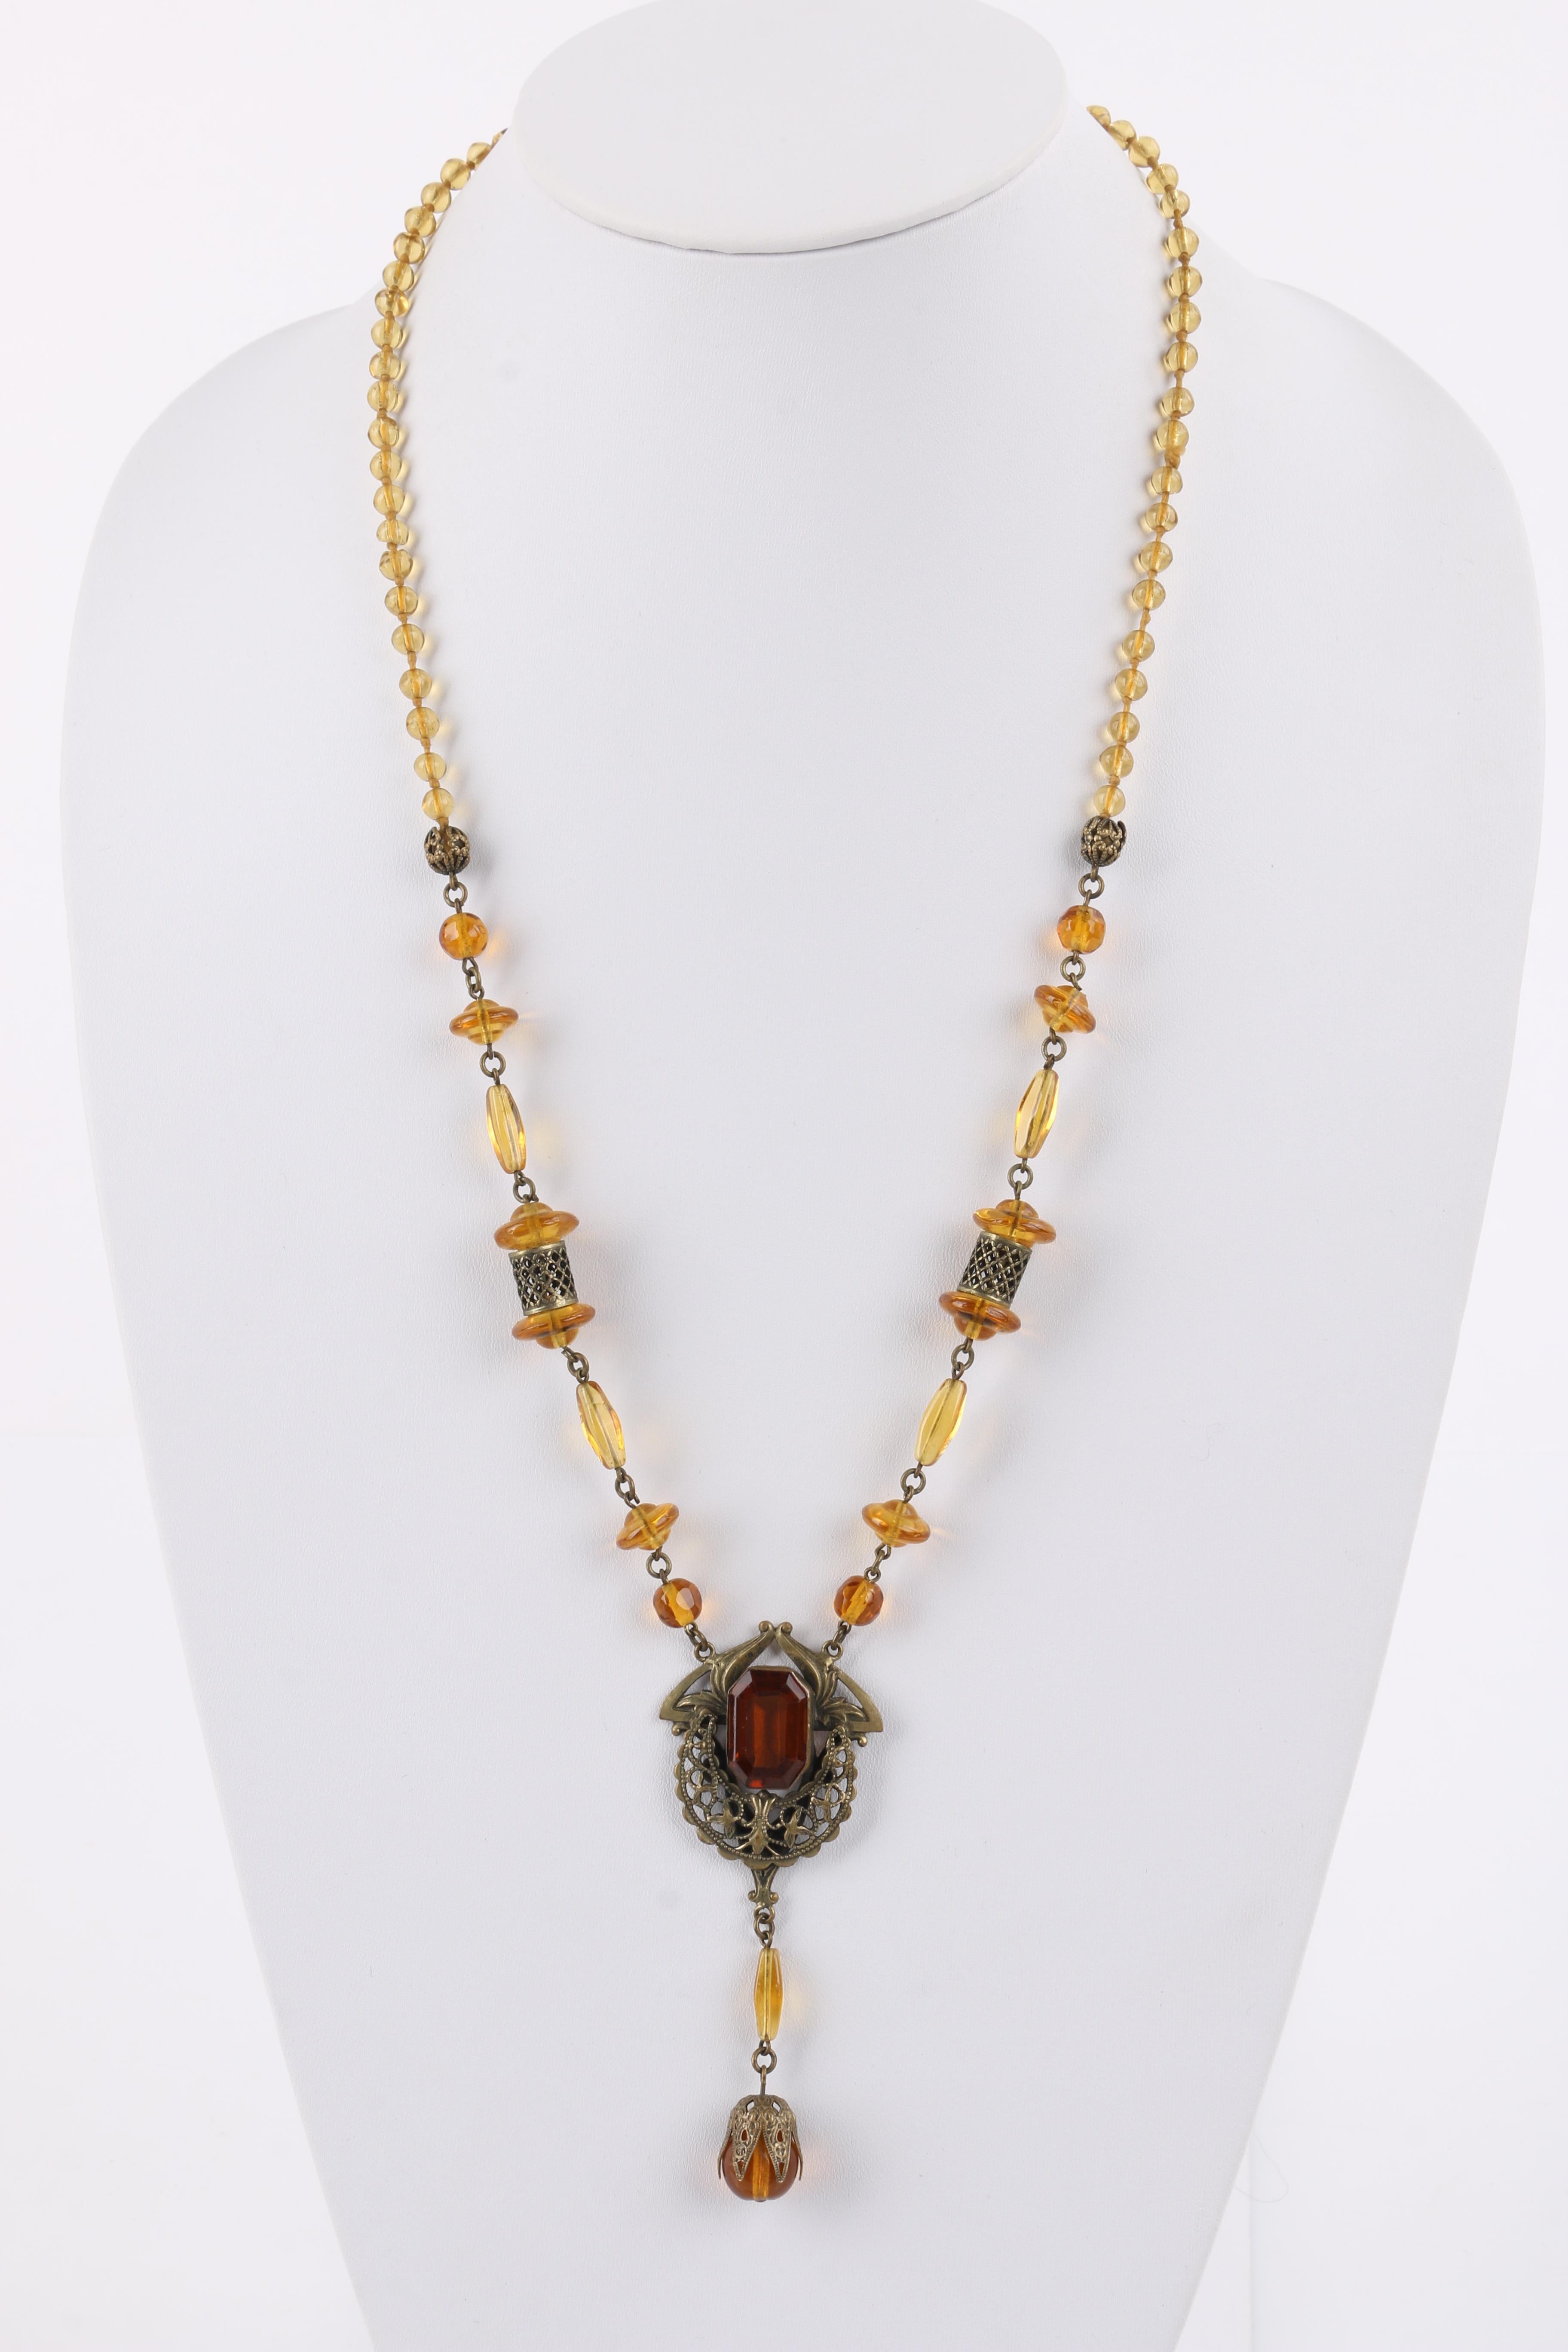 DESCRIPTION: ART NOUVEAU c.1920's Ornamental Brass Amber Czech Glass Beaded Pendant Necklace
 
Circa: c.1920’s
Markings: None
Style: Pendant necklace
Color(s): Amber; Brass
Unmarked Material (feel of): Brass-toned metal; glass
Additional Details /